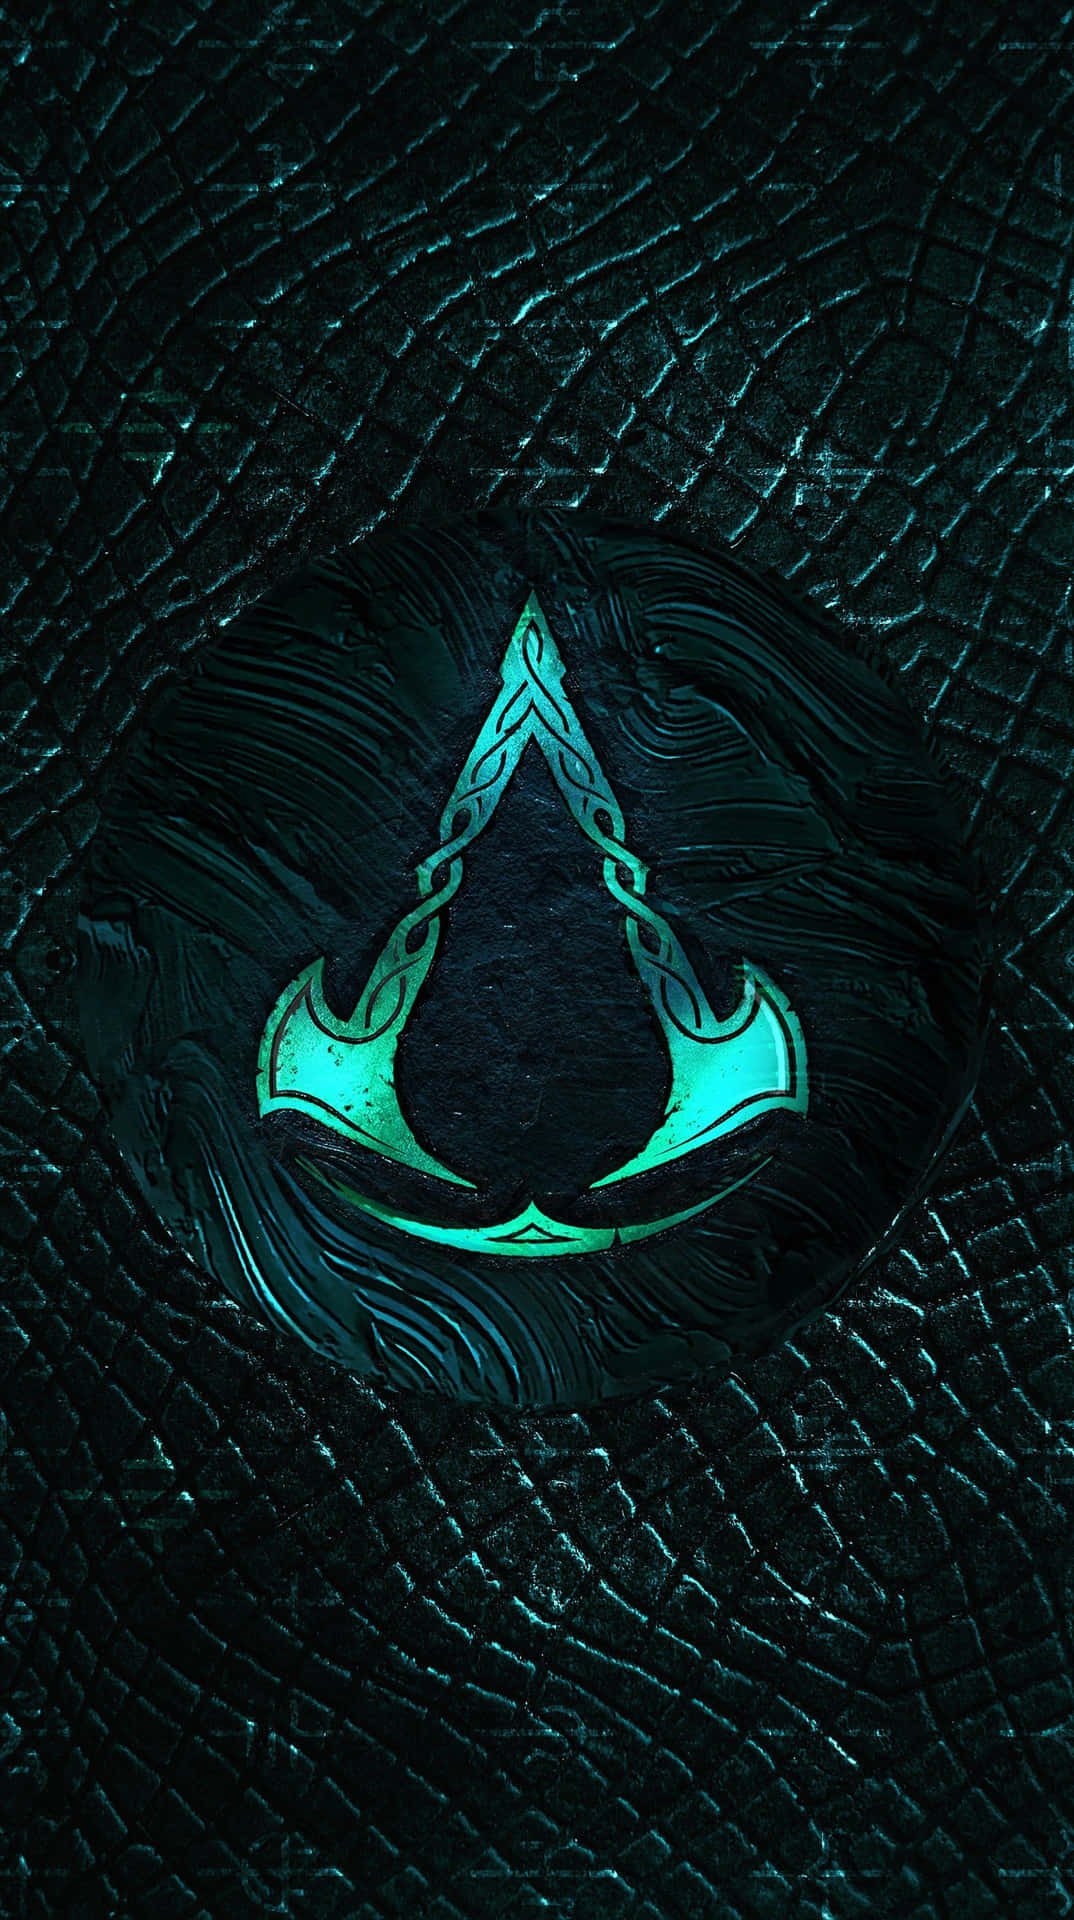 Assassin's Creed Logo On A Black Background